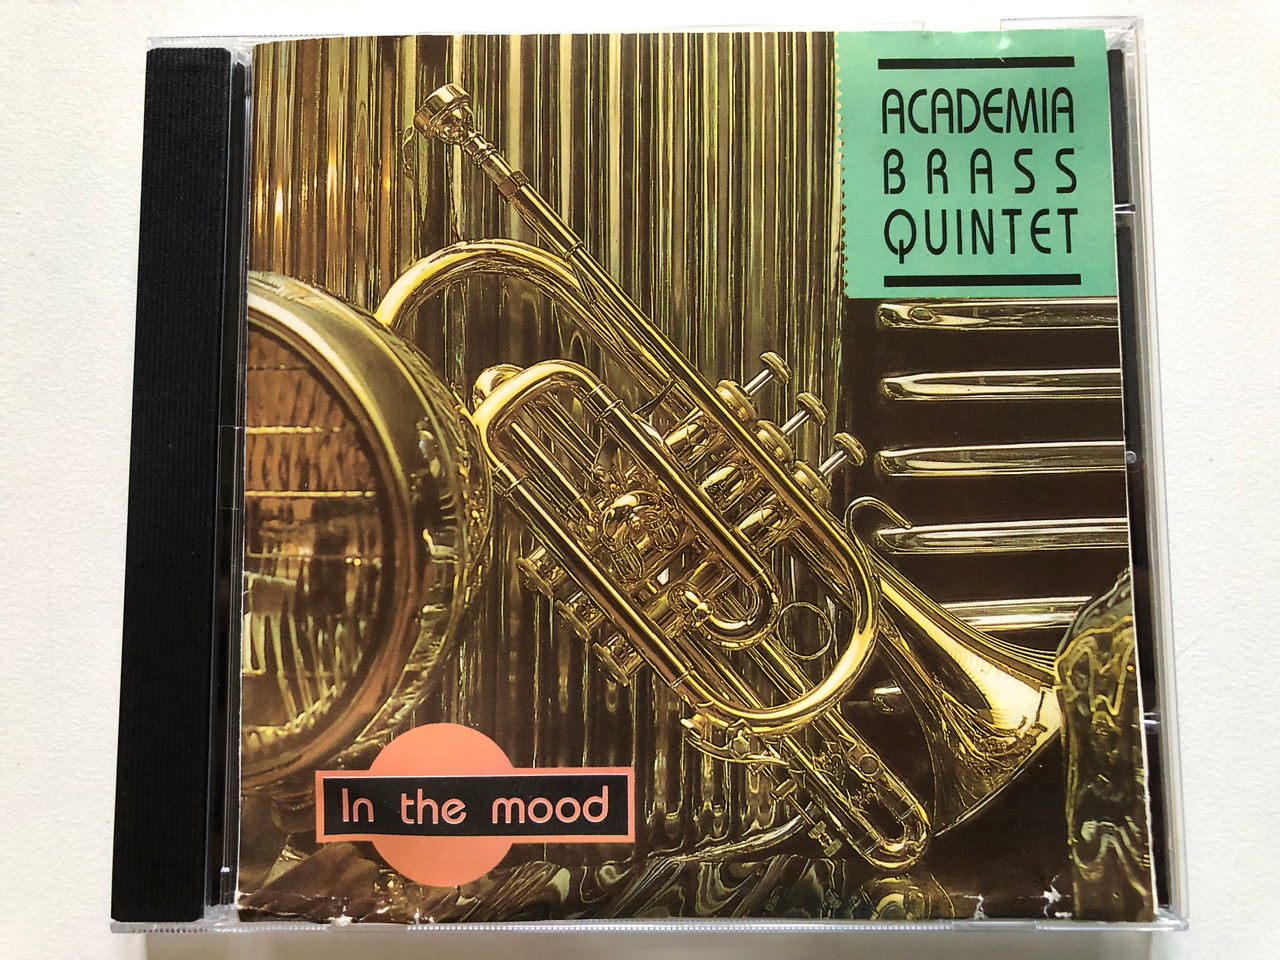 https://cdn10.bigcommerce.com/s-62bdpkt7pb/products/0/images/307995/Academia_Brass_Quintet_In_The_Mood_Audio_CD_1993_ABQ_5002_1__81992.1698918418.1280.1280.JPG?c=2